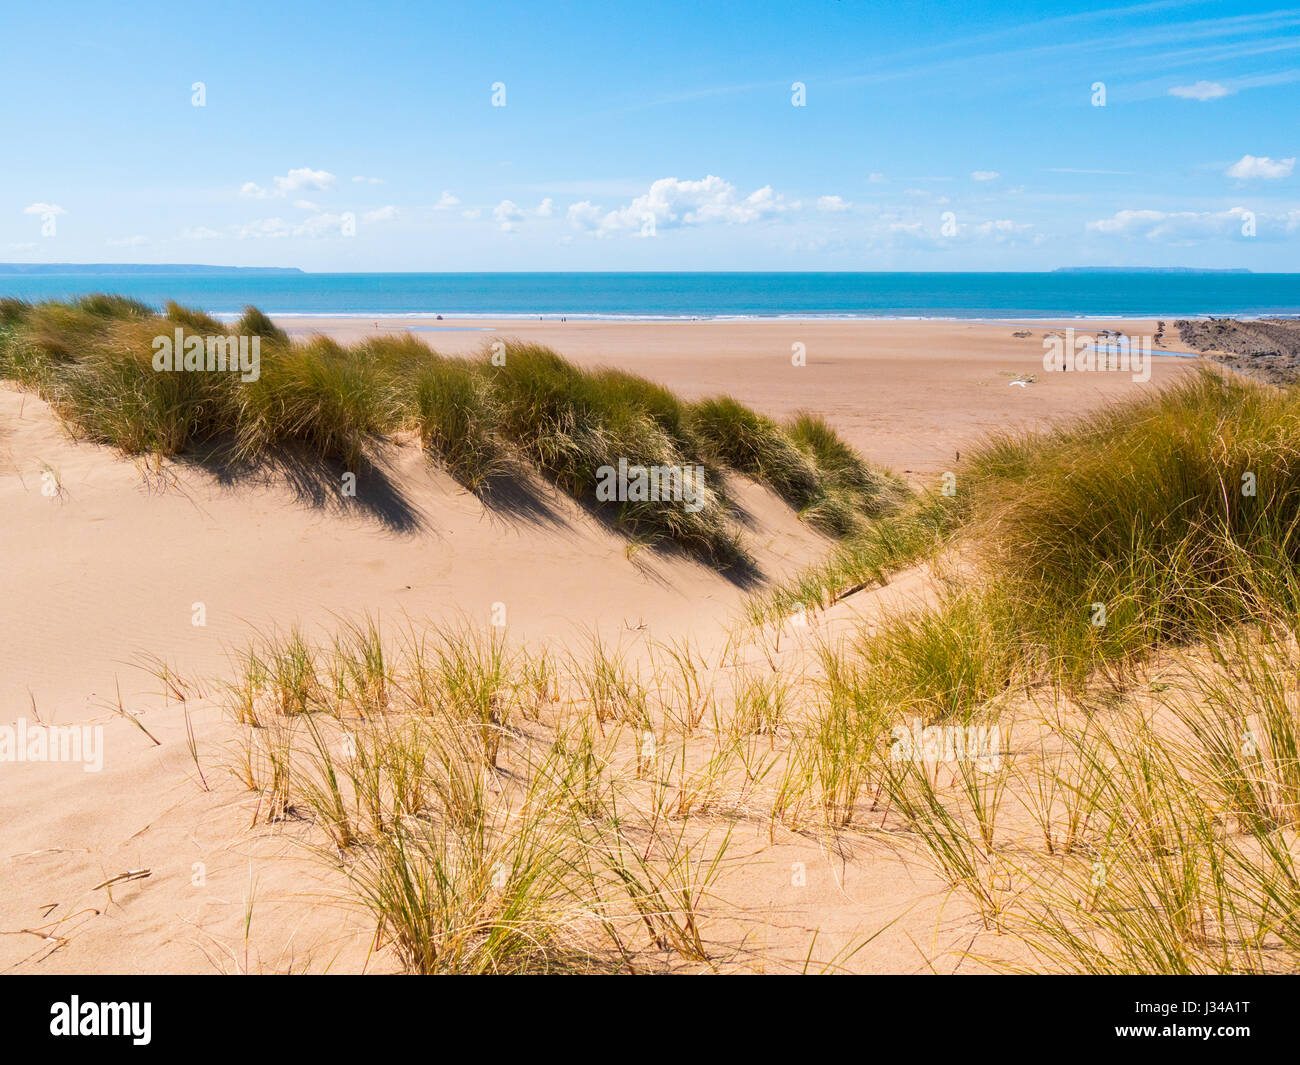 Sand dunes at Croyde beach on a sunny day with clear blue skies, Devon, England, UK Stock Photo